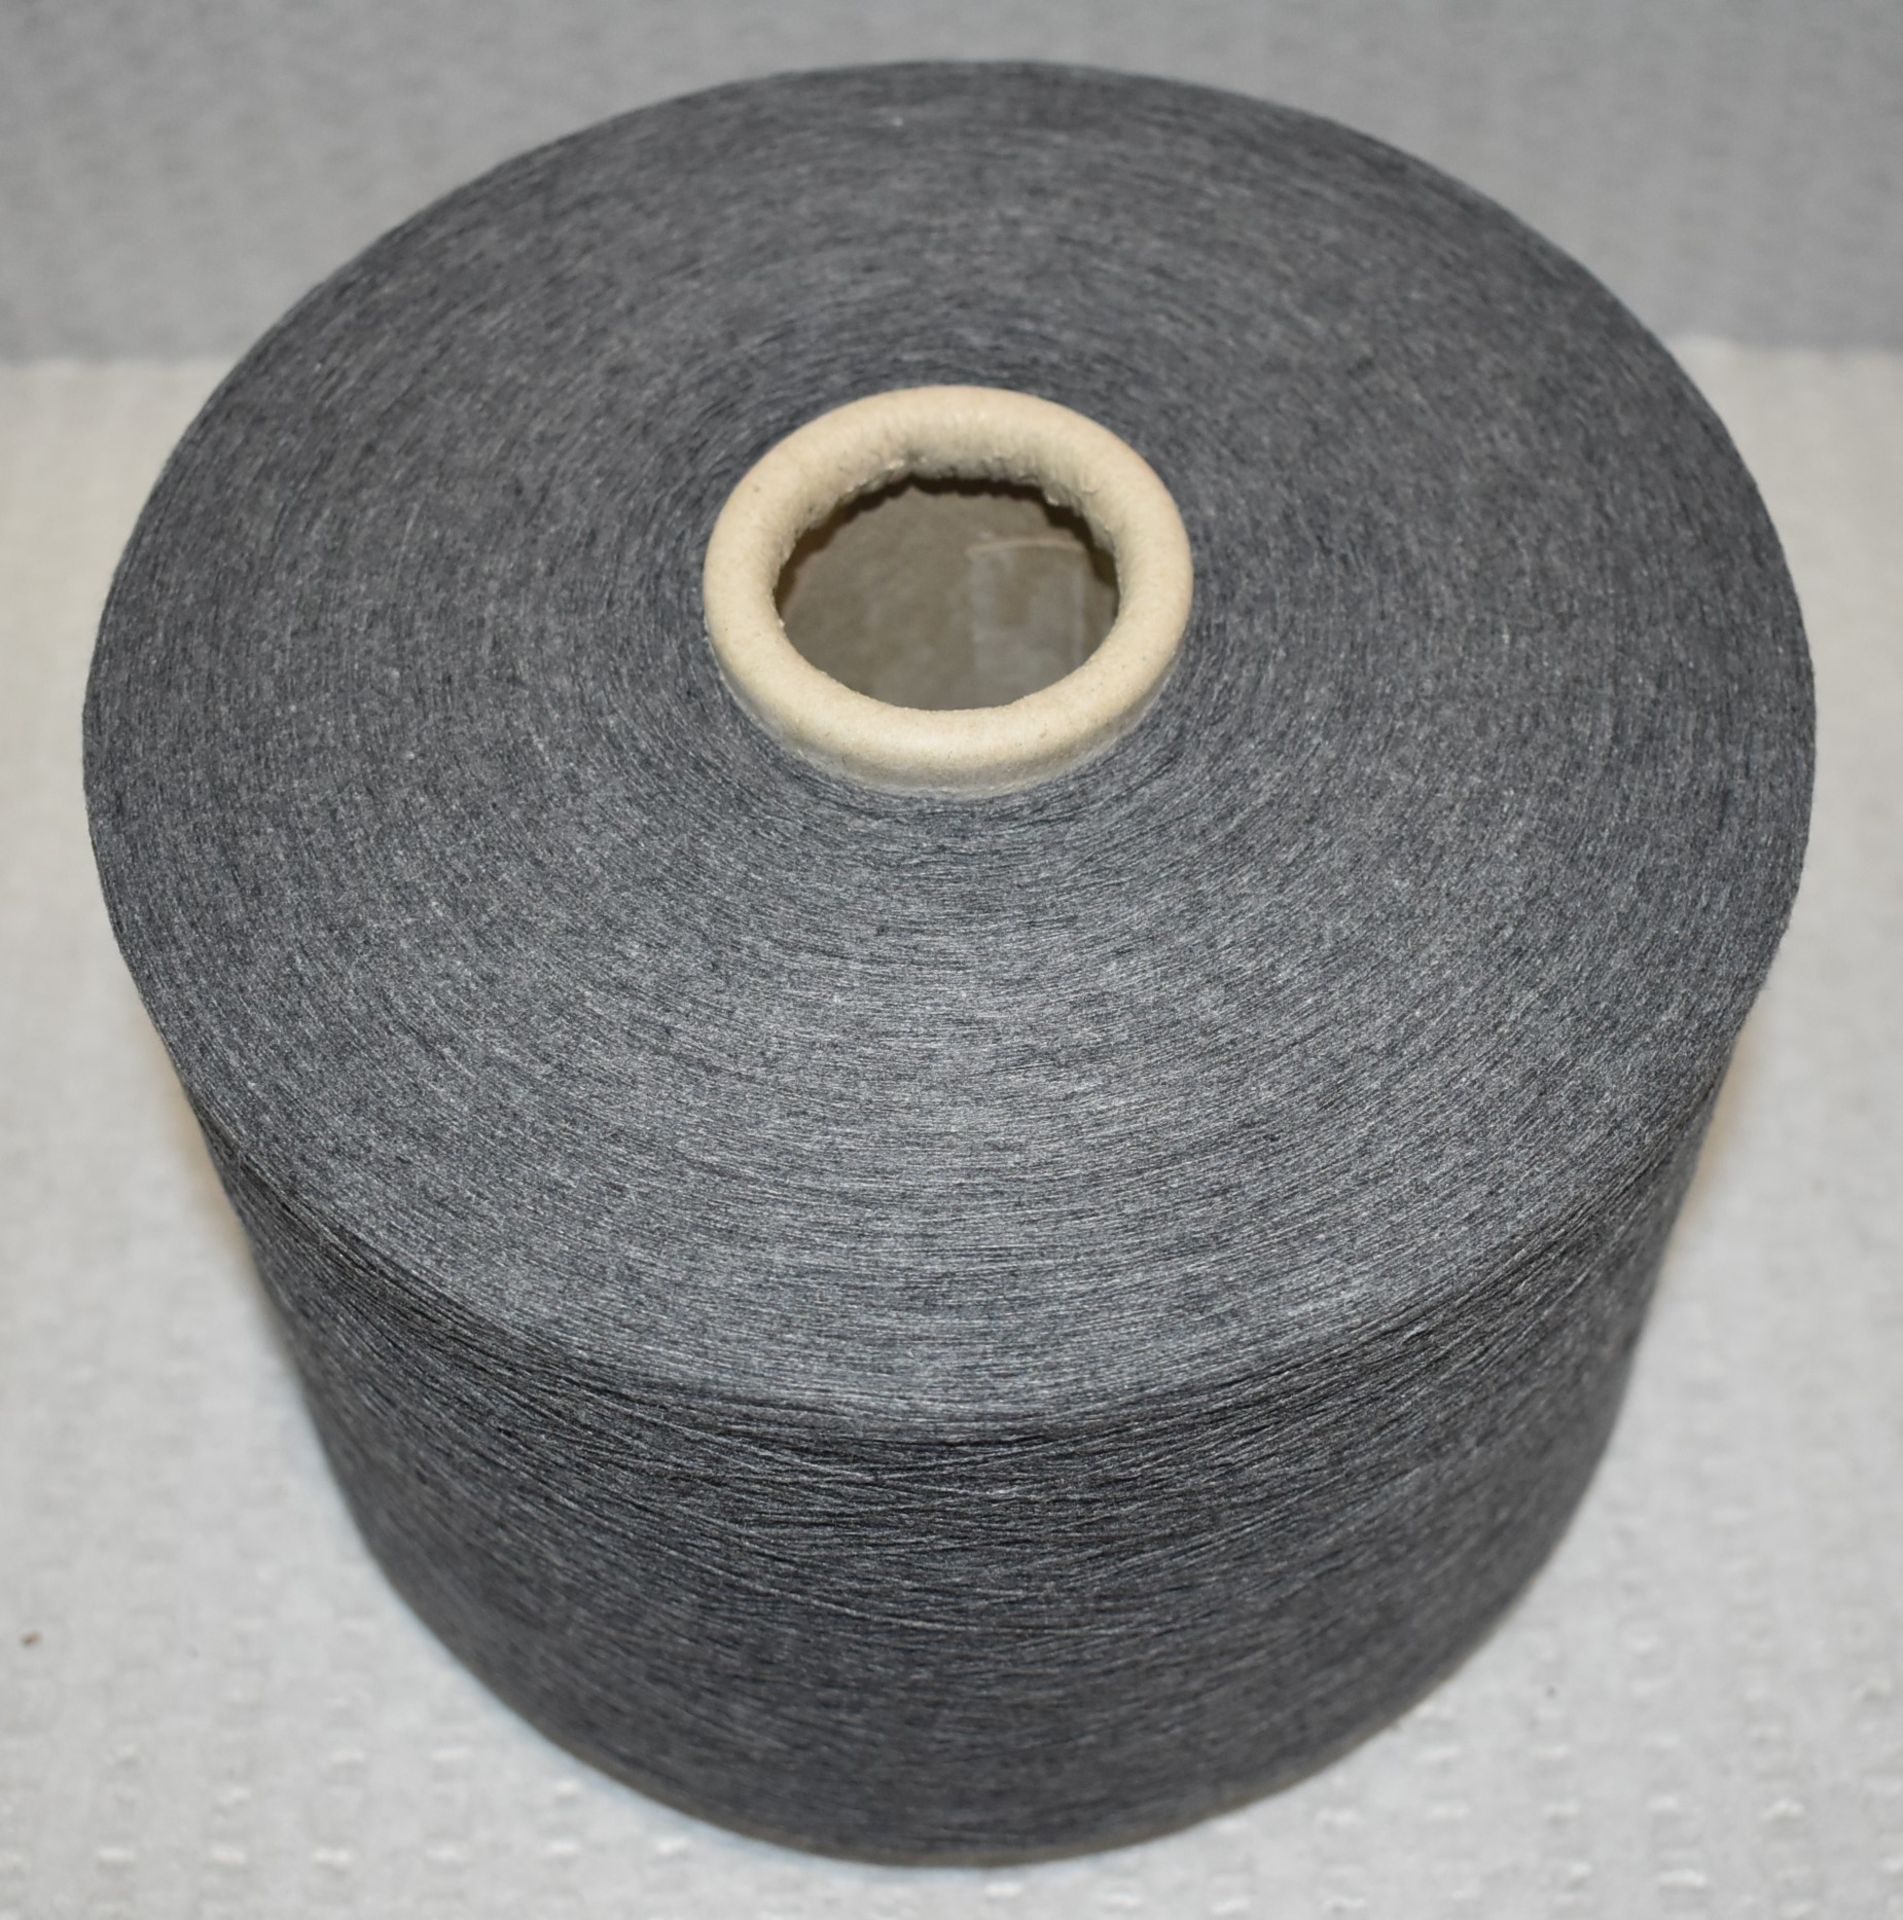 36 x Cones of 1/13 MicroCotton Knitting Yarn - Mid Grey - Approx Weight: 2,500g - New Stock ABL Yarn - Image 4 of 12